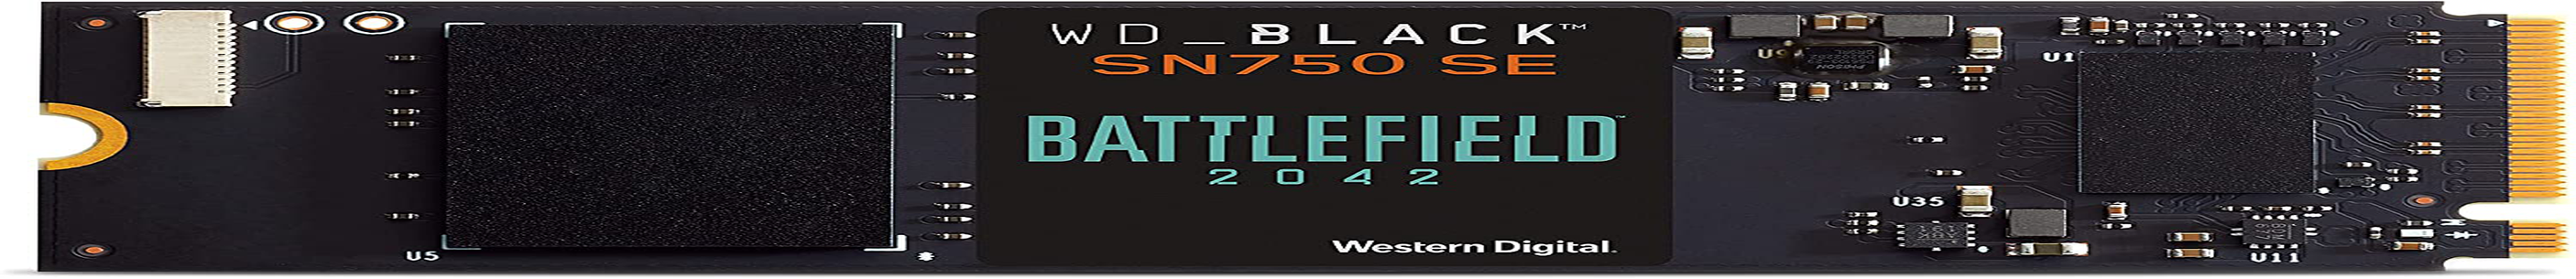 WD_BLACK 1TB SN750 SE Nvme SSD with Battlefield 2042 Game Code Bundle - Gen4 Pcle, Internal Gaming SSD Solid State Drive, M.2 2280, up to 3,600 Mb/S - WDBB9J0010BNC-NRSN